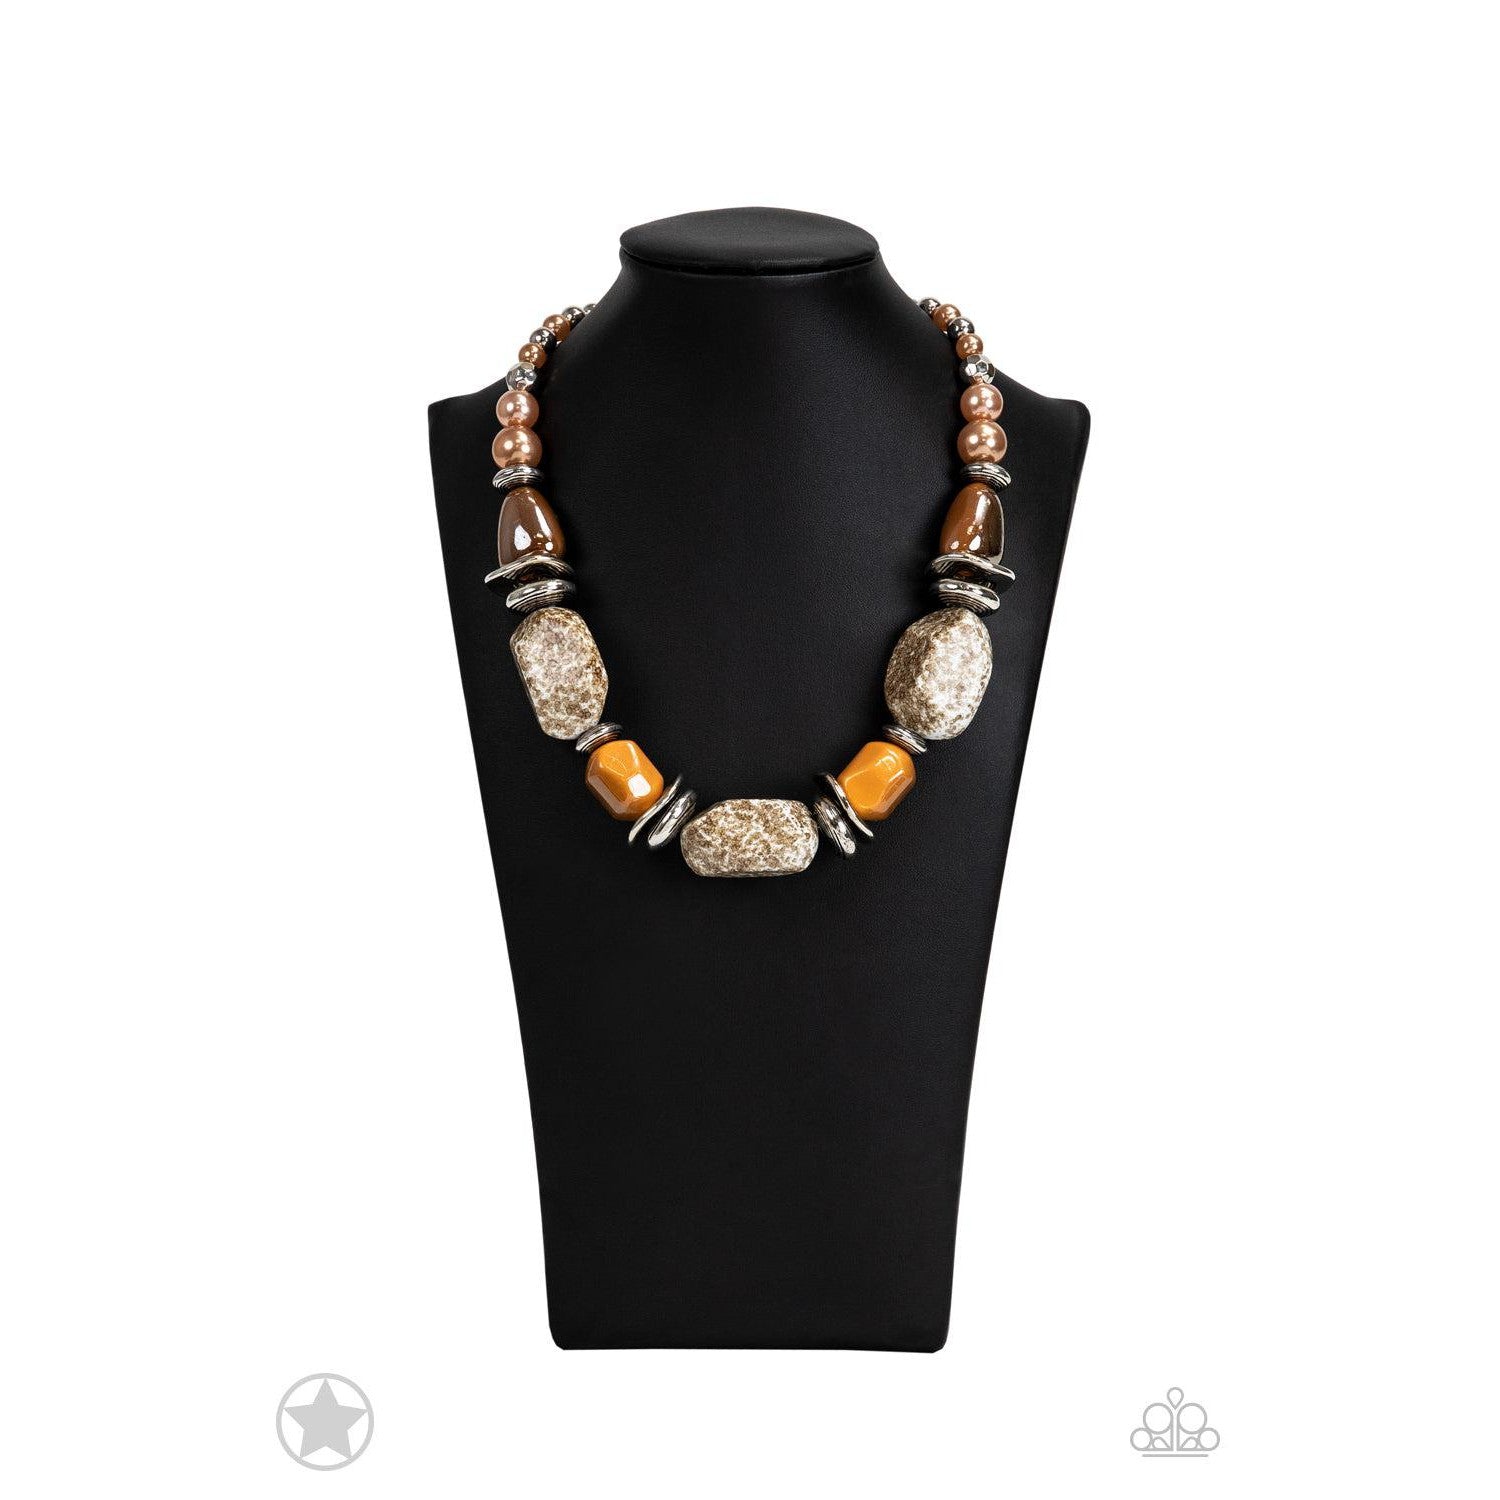 In Good Glazes - Peach Brown Blockbuster Necklace - A Large Selection Hand-Chains And Jewelry On rainbowartsreview,Women's Jewelry | Necklaces, Earrings, Bracelets